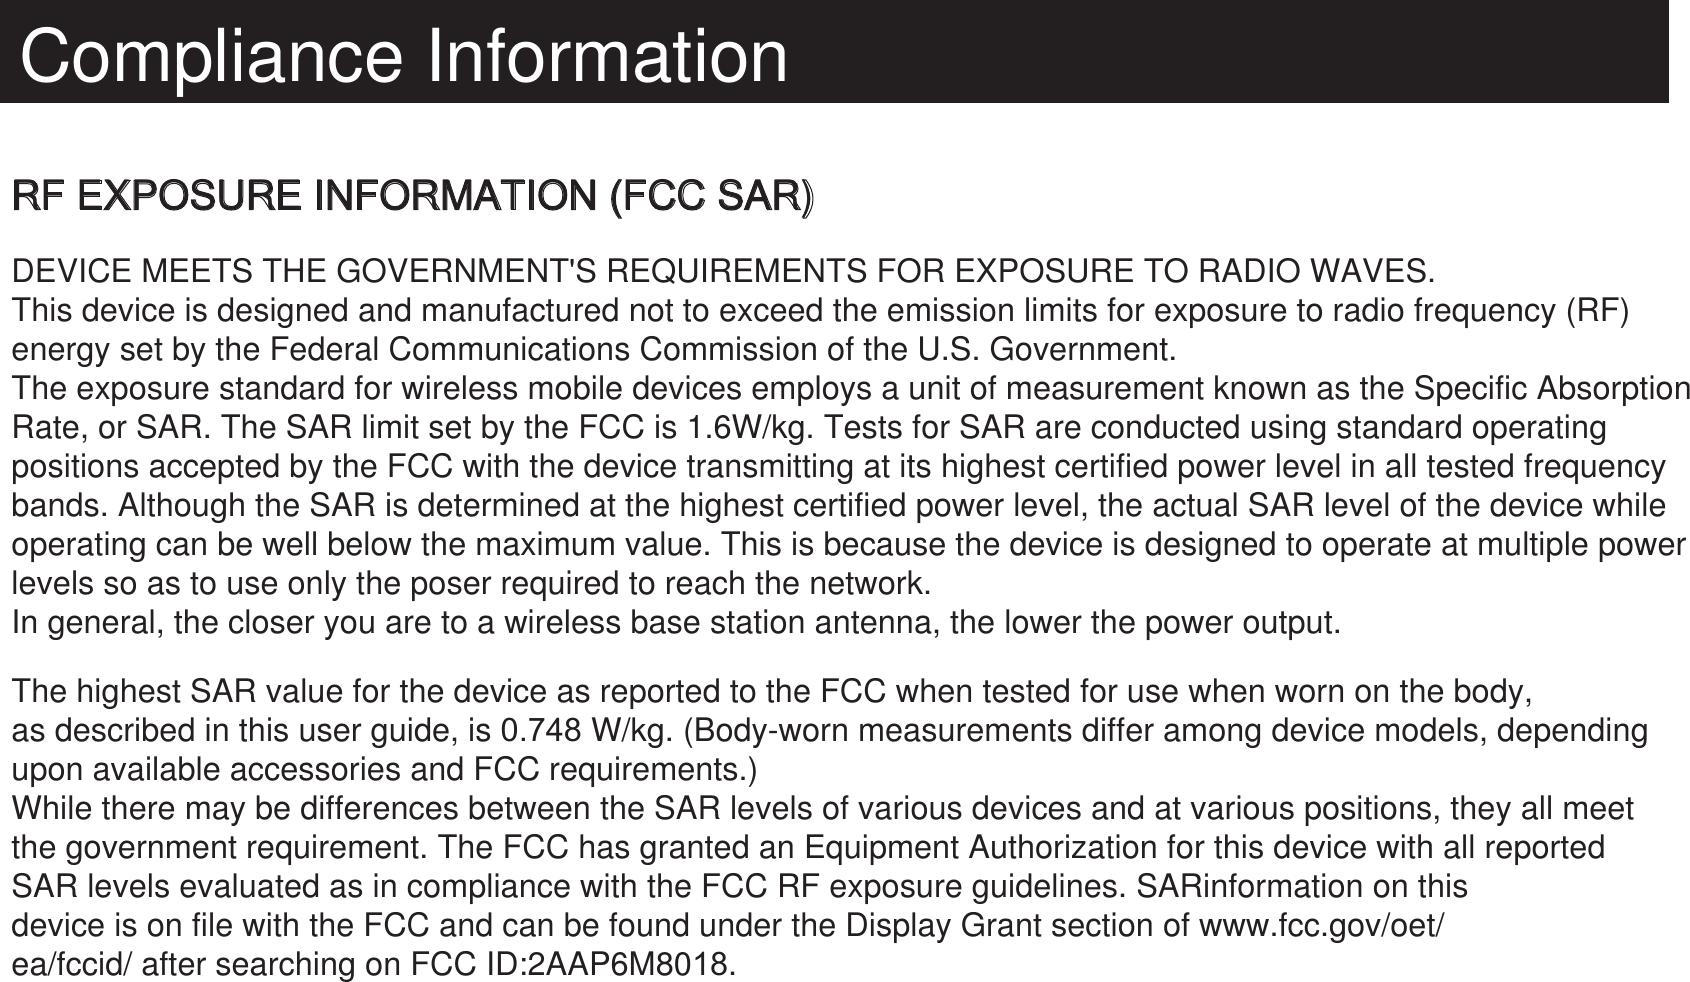 Compliance InformationRF EXPOSURE INFORMATION (FCC SAR)DEVICE MEETS THE GOVERNMENT&apos;S REQUIREMENTS FOR EXPOSURE TO RADIO WAVES.This device is designed and manufactured not to exceed the emission limits for exposure to radio frequency (RF) energy set by the Federal Communications Commission of the U.S. Government.The exposure standard for wireless mobile devices employs a unit of measurement known as the Specific AbsorptionRate, or SAR. The SAR limit set by the FCC is 1.6W/kg. Tests for SAR are conducted using standard operating positions accepted by the FCC with the device transmitting at its highest certified power level in all tested frequencybands. Although the SAR is determined at the highest certified power level, the actual SAR level of the device while operating can be well below the maximum value. This is because the device is designed to operate at multiple powerlevels so as to use only the poser required to reach the network.In general, the closer you are to a wireless base station antenna, the lower the power output.The highest SAR value for the device as reported to the FCC when tested for use when worn on the body, as described in this user guide, is 0.748 W/kg. (Body-worn measurements differ among device models, depending upon available accessories and FCC requirements.)While there may be differences between the SAR levels of various devices and at various positions, they all meet the government requirement. The FCC has granted an Equipment Authorization for this device with all reported SAR levels evaluated as in compliance with the FCC RF exposure guidelines. SARinformation on thisdevice is on file with the FCC and can be found under the Display Grant section of www.fcc.gov/oet/ea/fccid/ after searching on FCC ID:2AAP6M80.